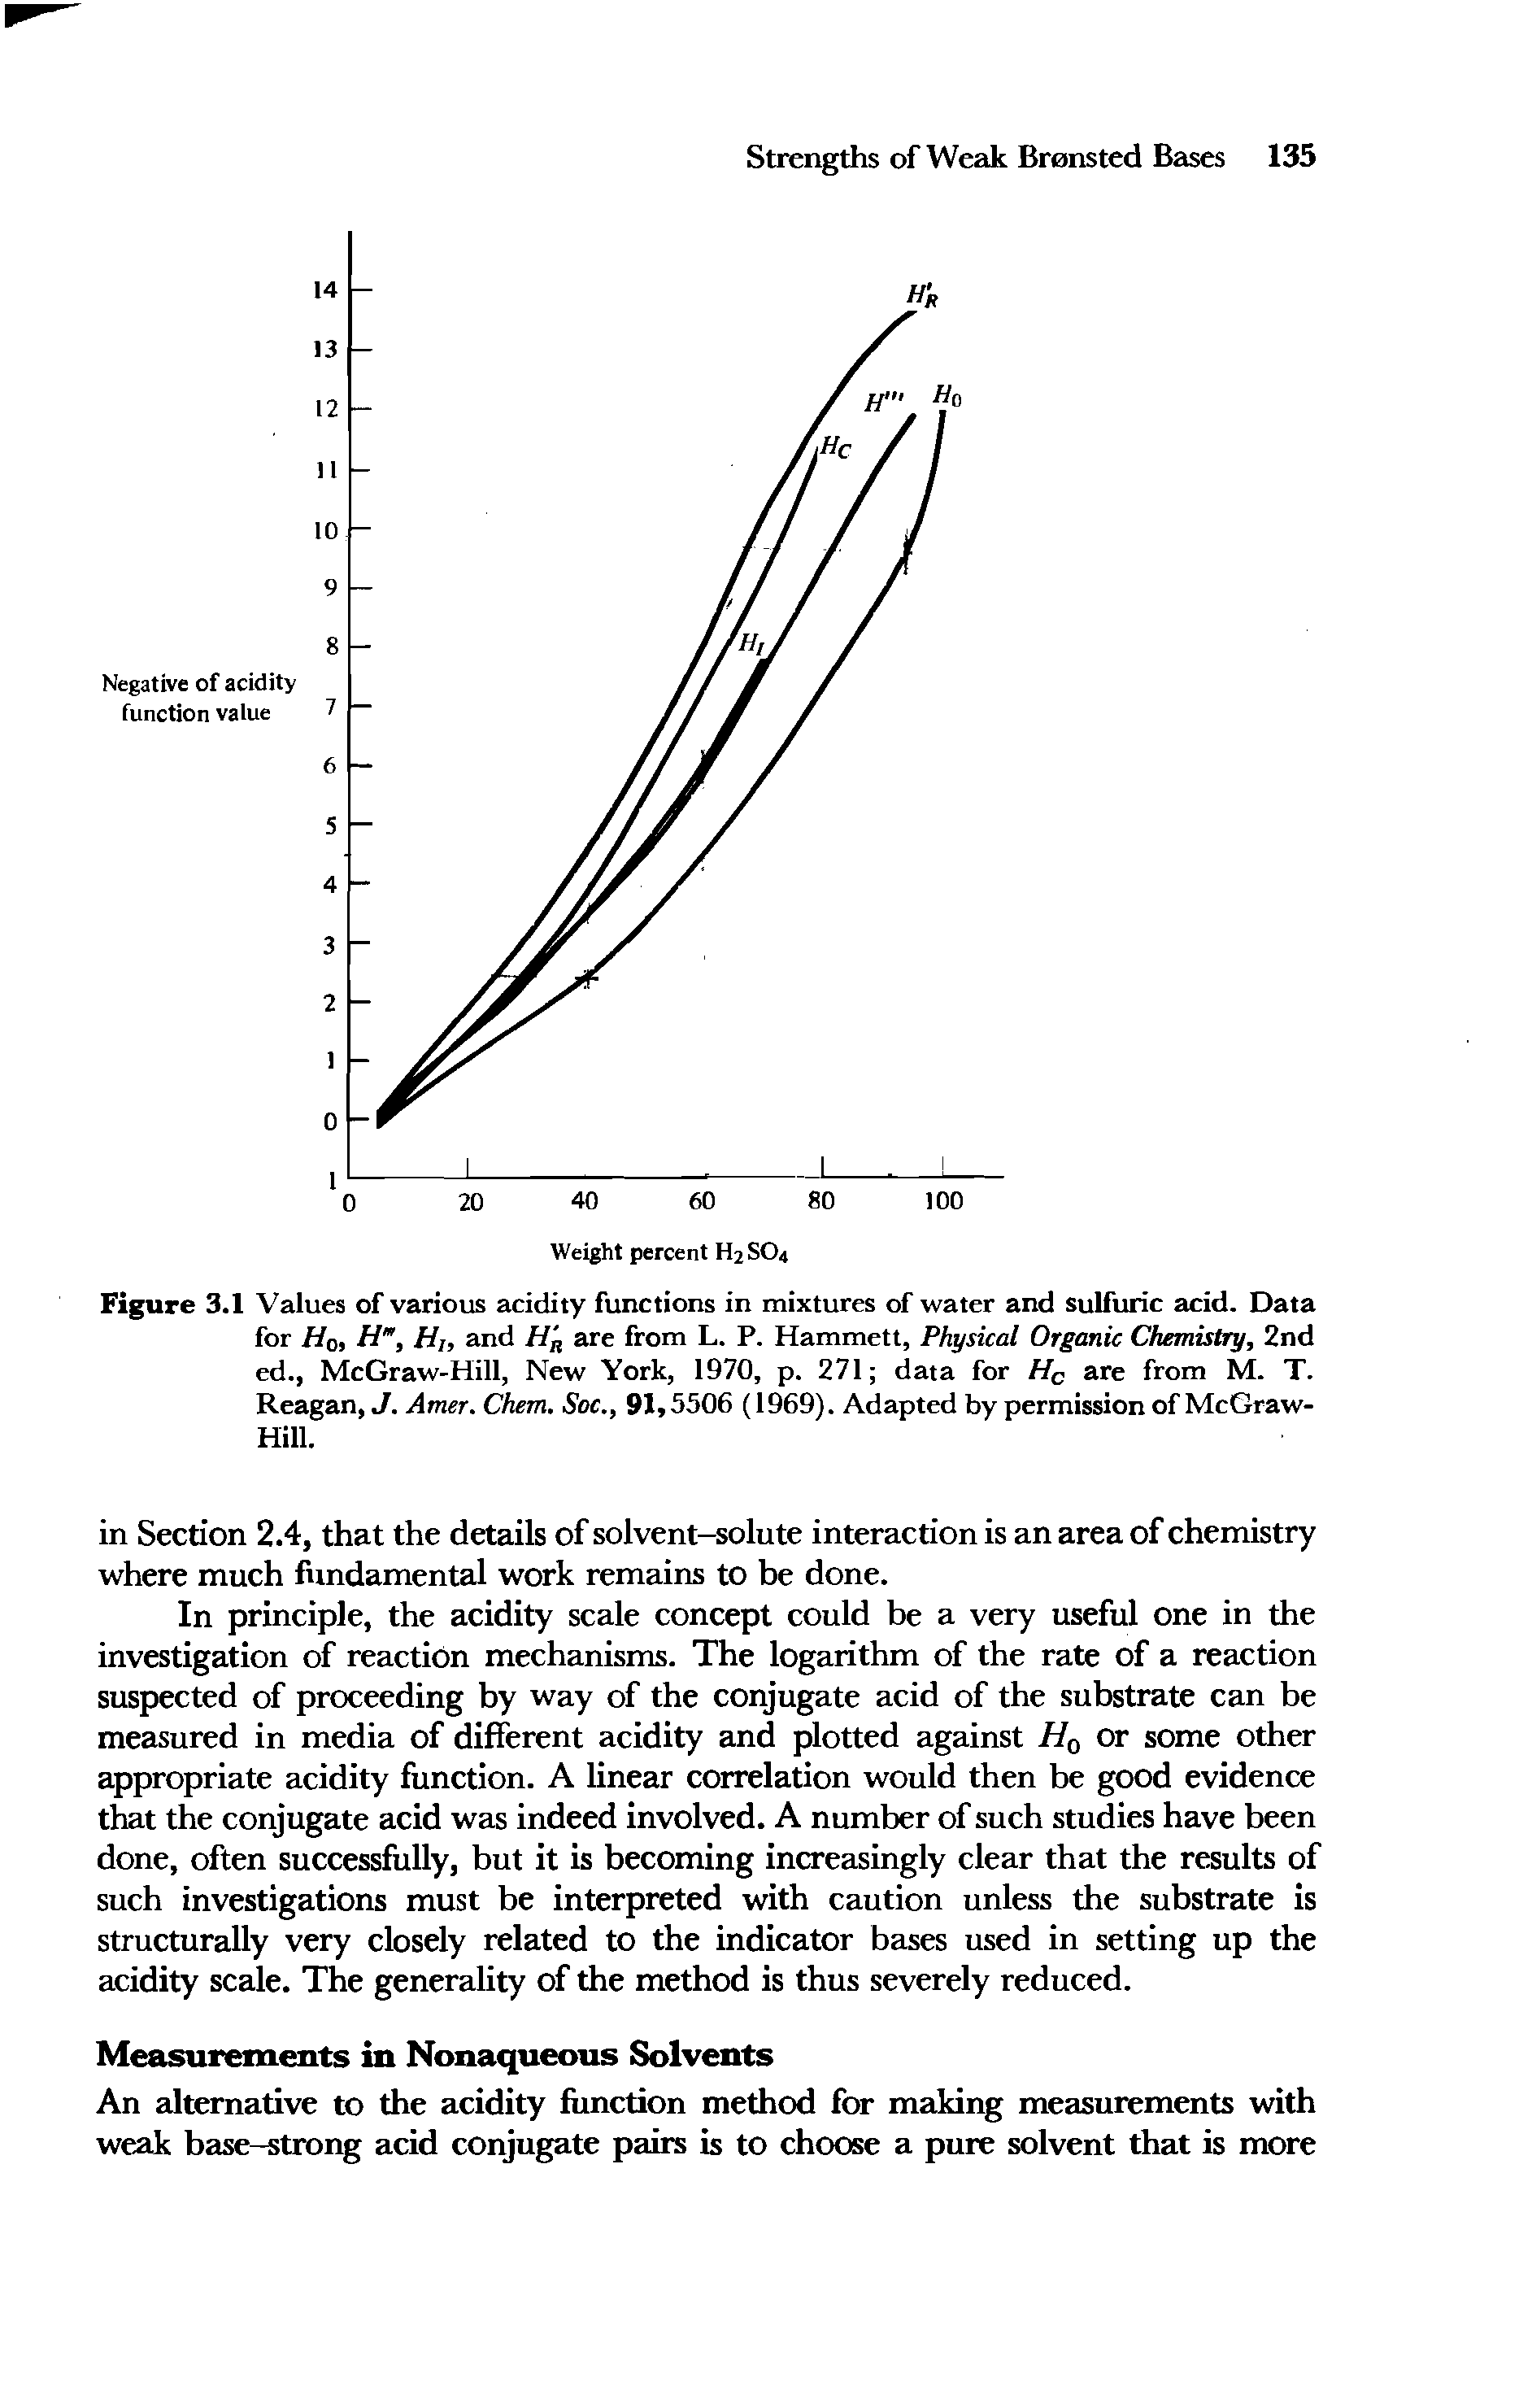 Figure 3.1 Values of various acidity functions in mixtures of water and sulfuric acid. Data for H0, Hm, Hi, and H n are from L. P. Hammett, Physical Organic Chemistry, 2nd ed., McGraw-Hill, New York, 1970, p. 271 data for Hc are from M. T. Reagan, J. Amer. Chem. Soc., 91,5506 (1969). Adapted by permission of McGraw-Hill.